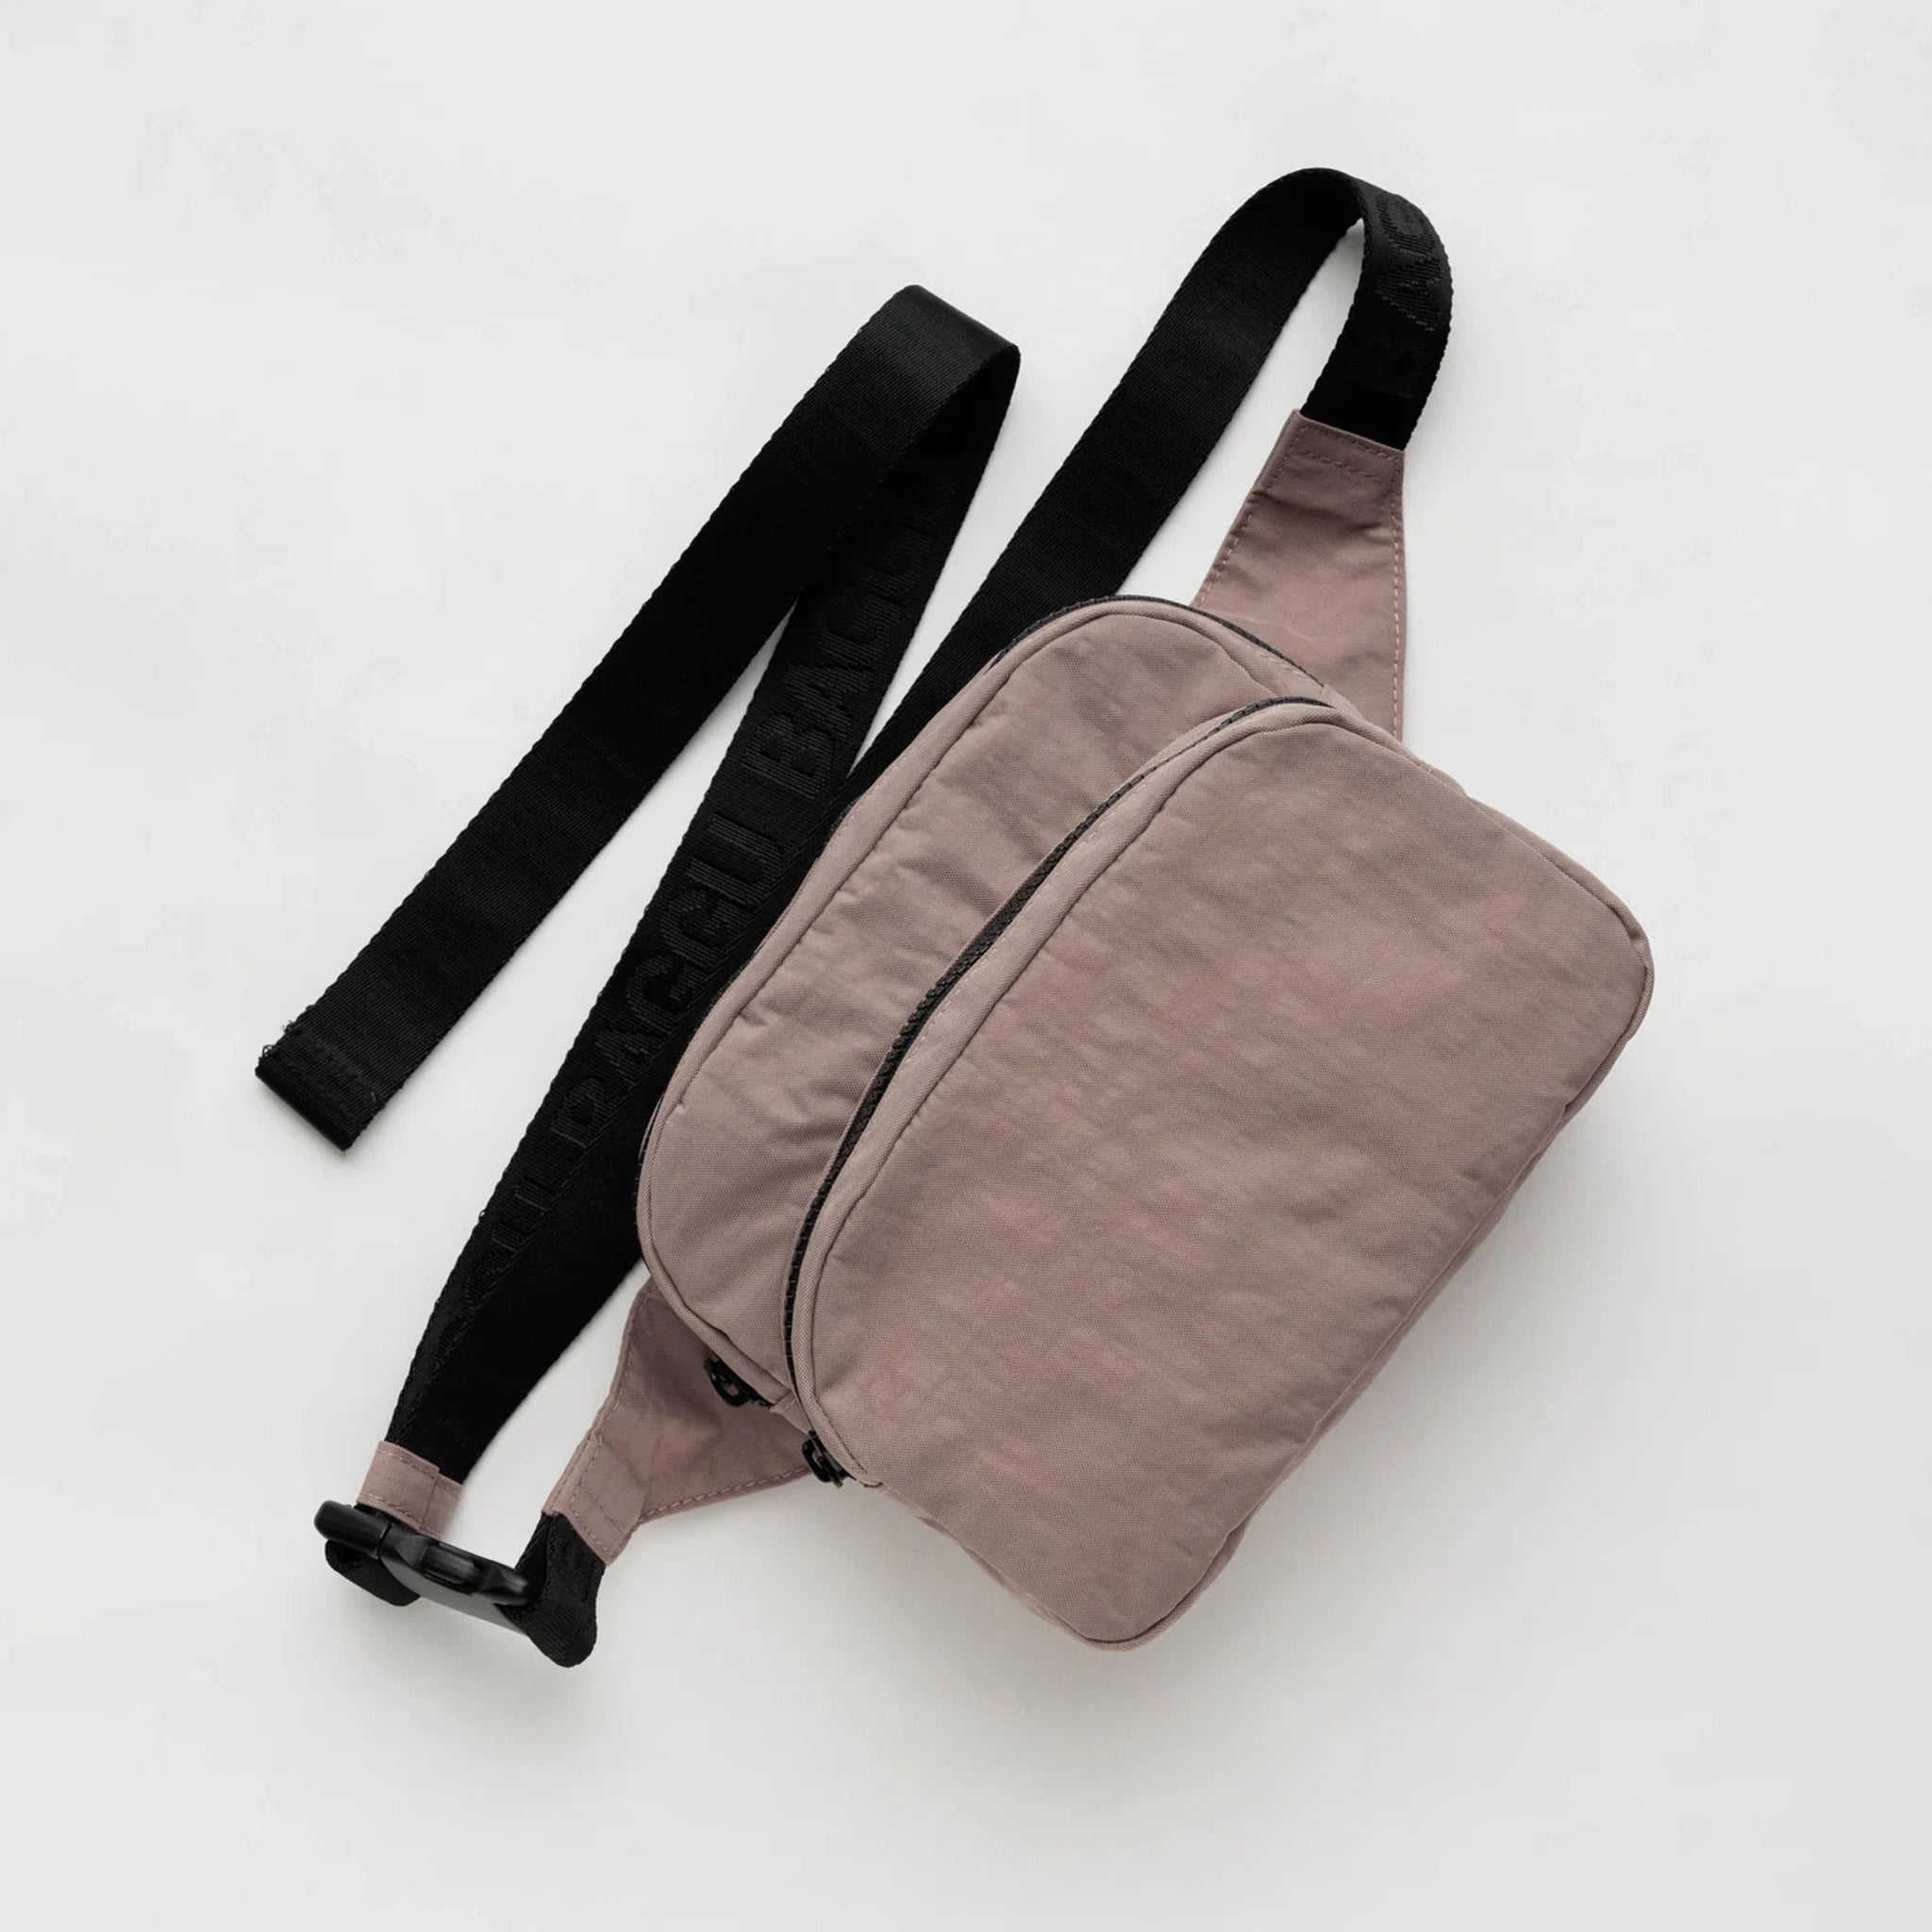 A taupe nylon fanny pack with two zipper pockets and a black adjustable strap.